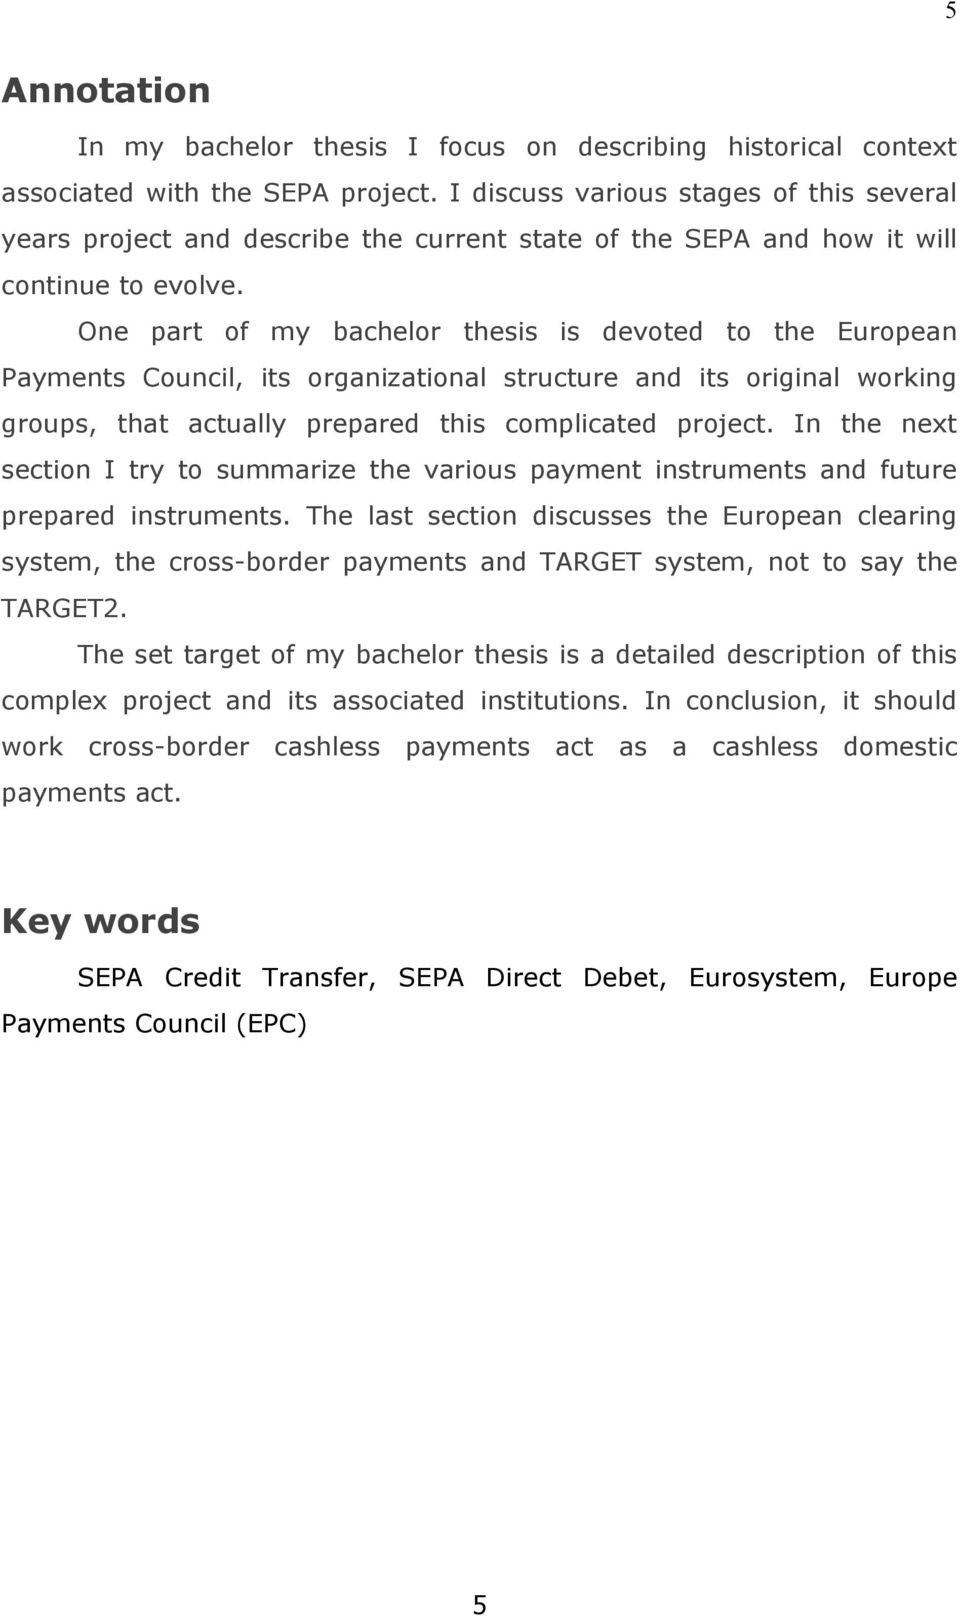 One part of my bachelor thesis is devoted to the European Payments Council, its organizational structure and its original working groups, that actually prepared this complicated project.